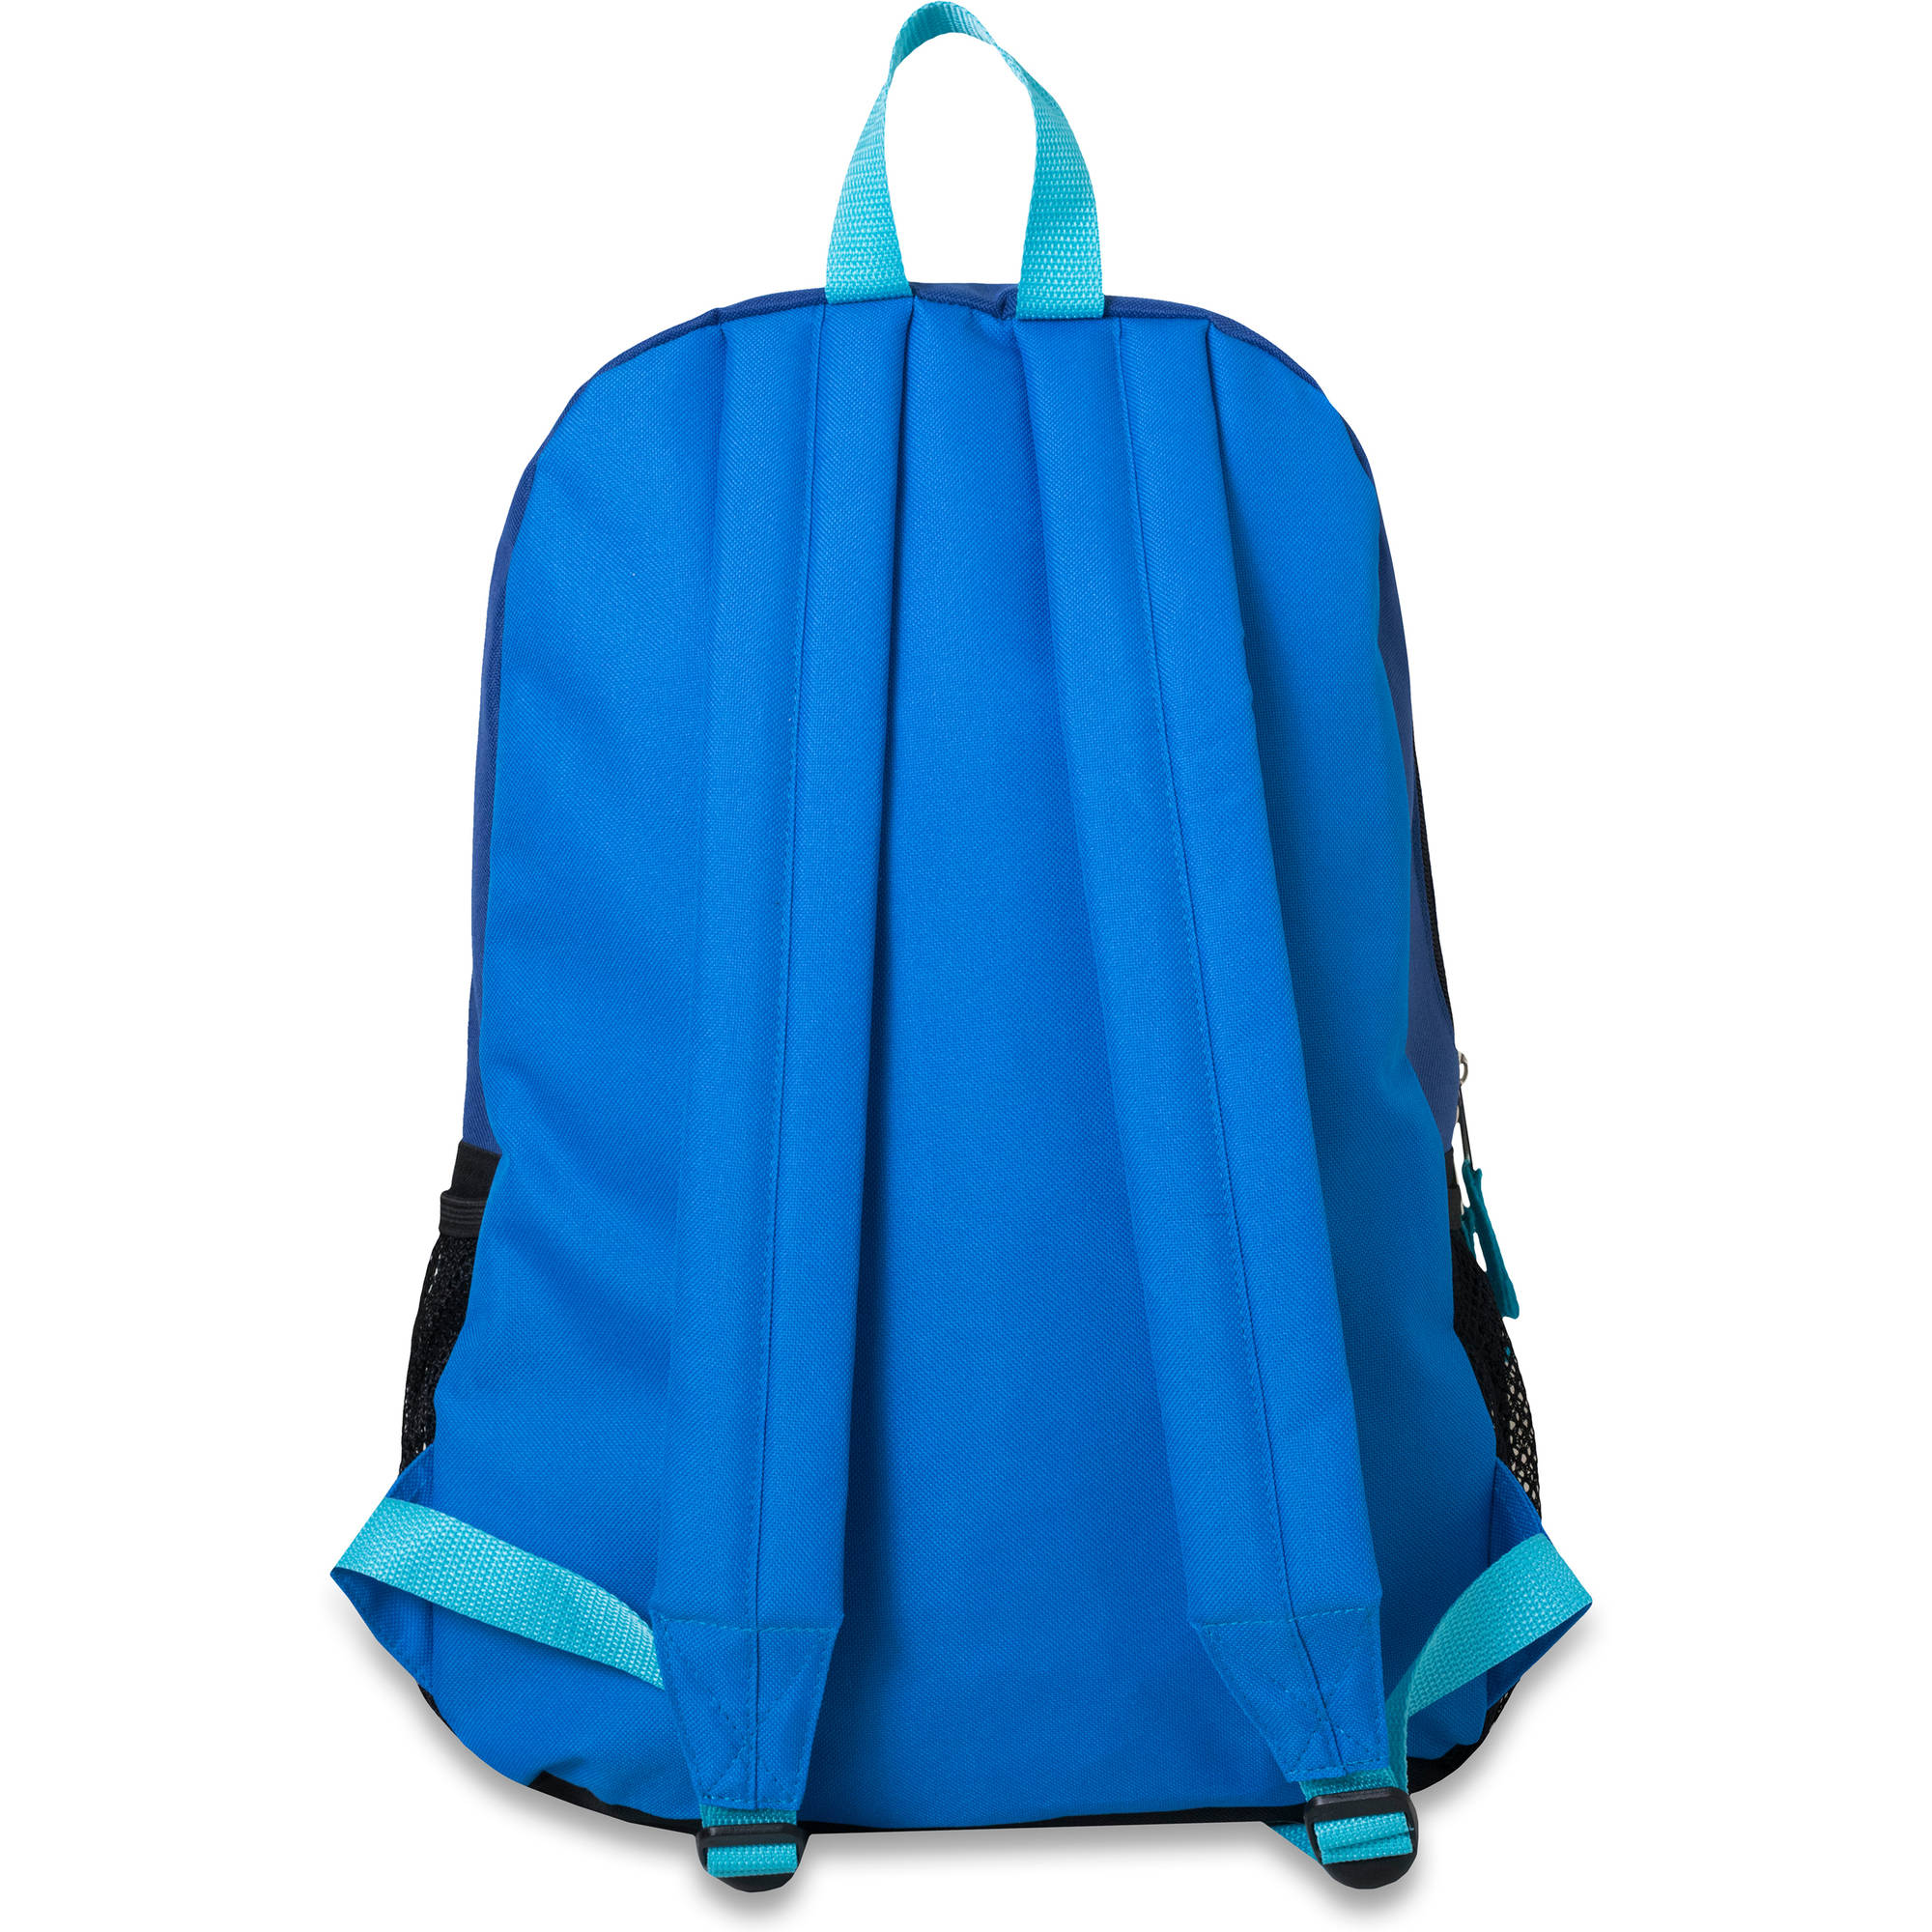 18 Inch Double Pocket Backpack - image 2 of 3